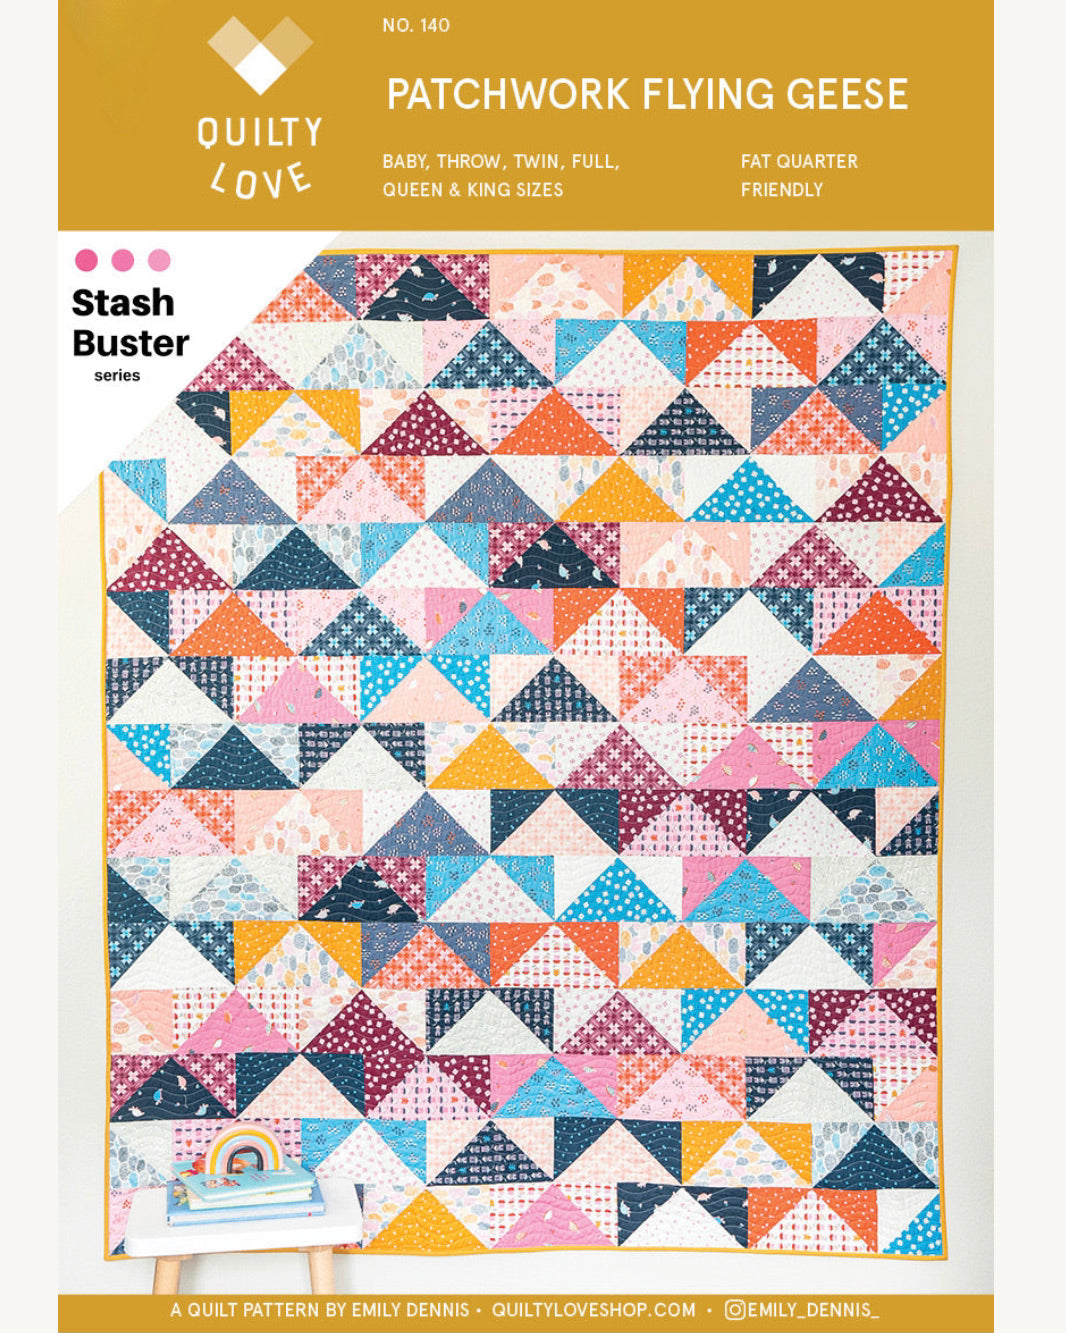 PATCHWORK FLYING GEESE Quilty Love Pattern Fat Quarter Friendly Quilt by Emily Dennis #140